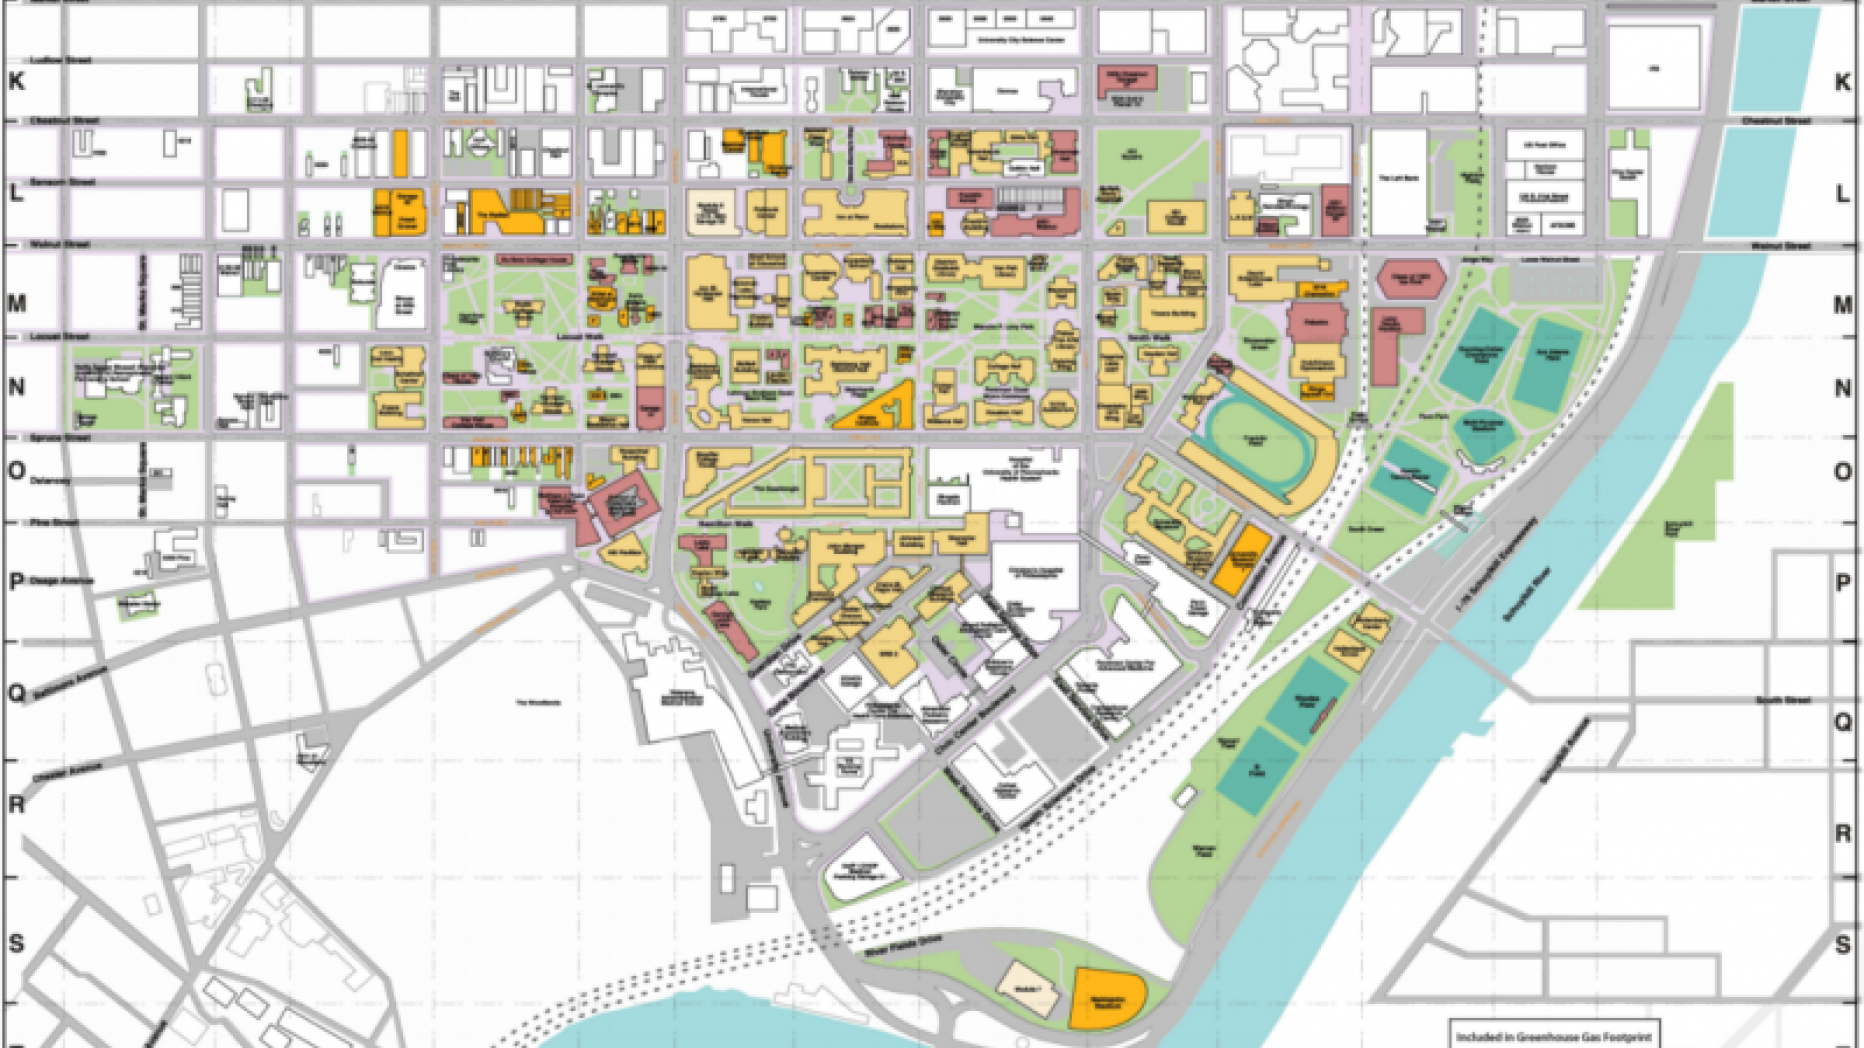 Map of UPenn campus with different types of buildings labeled.